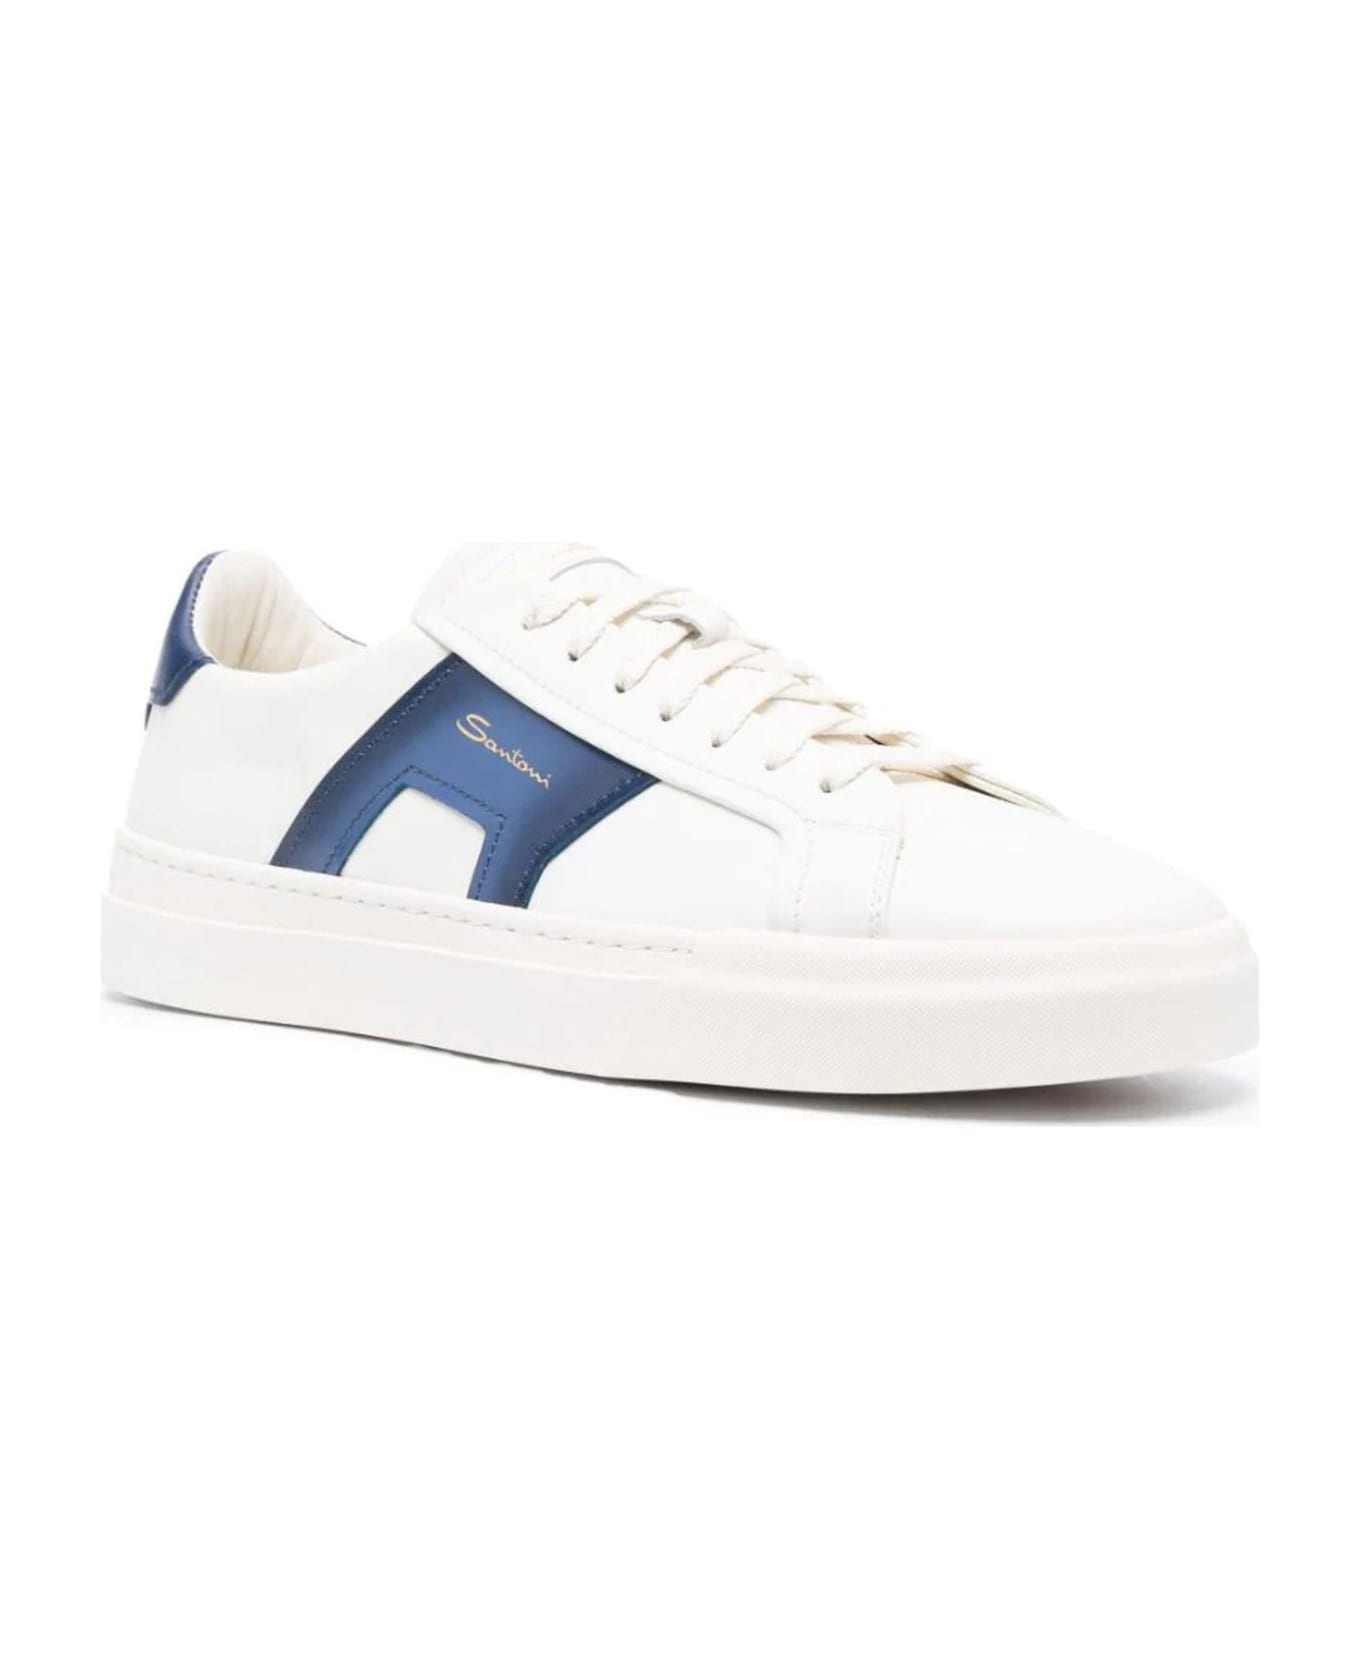 Santoni White And Blue Leather Sneakers - White